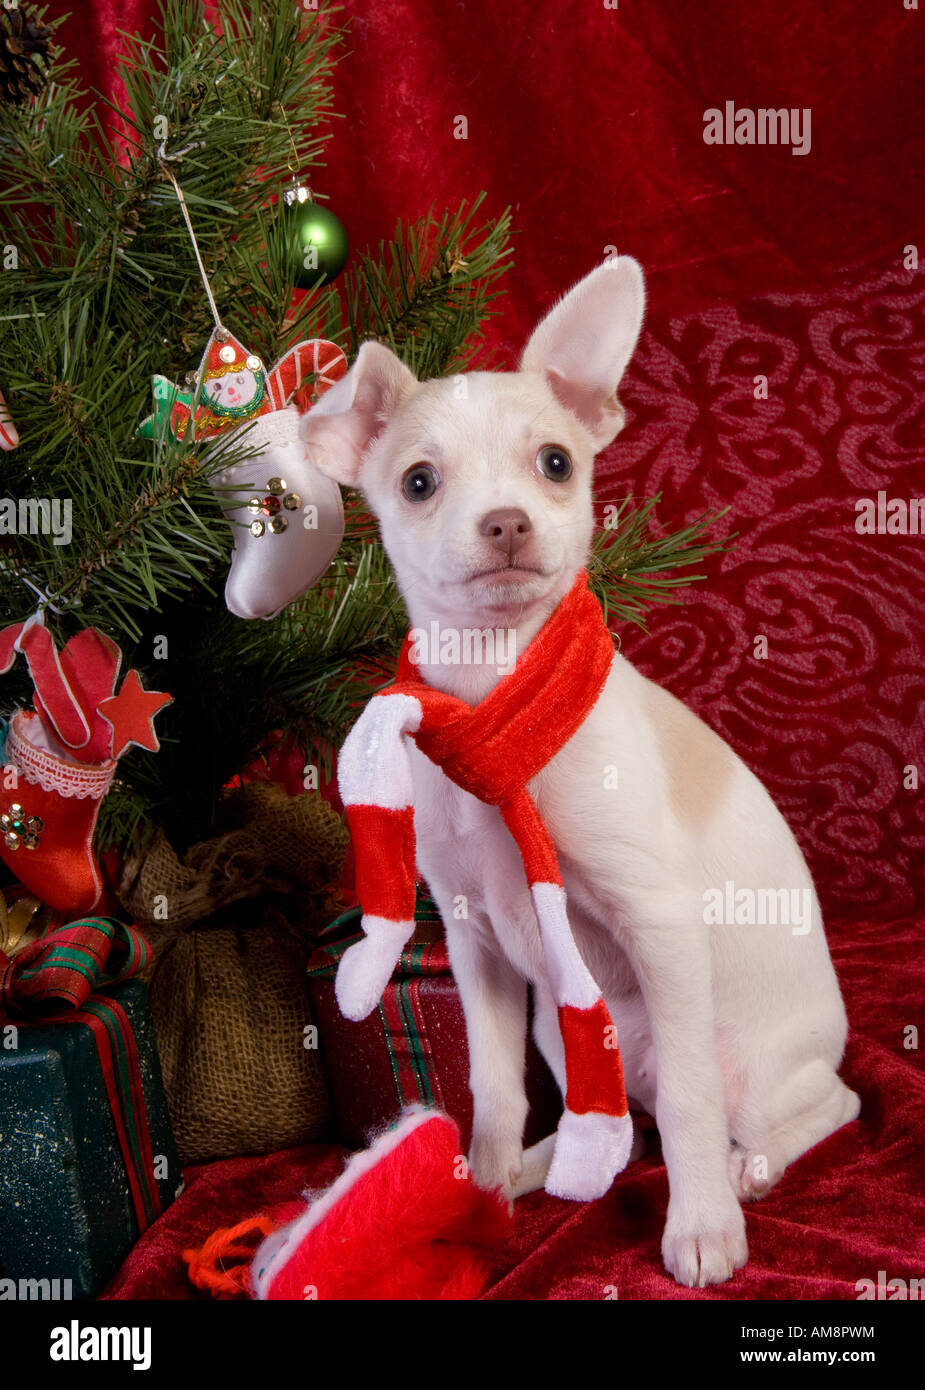 88+ Cute Chihuahua Christmas Pictures